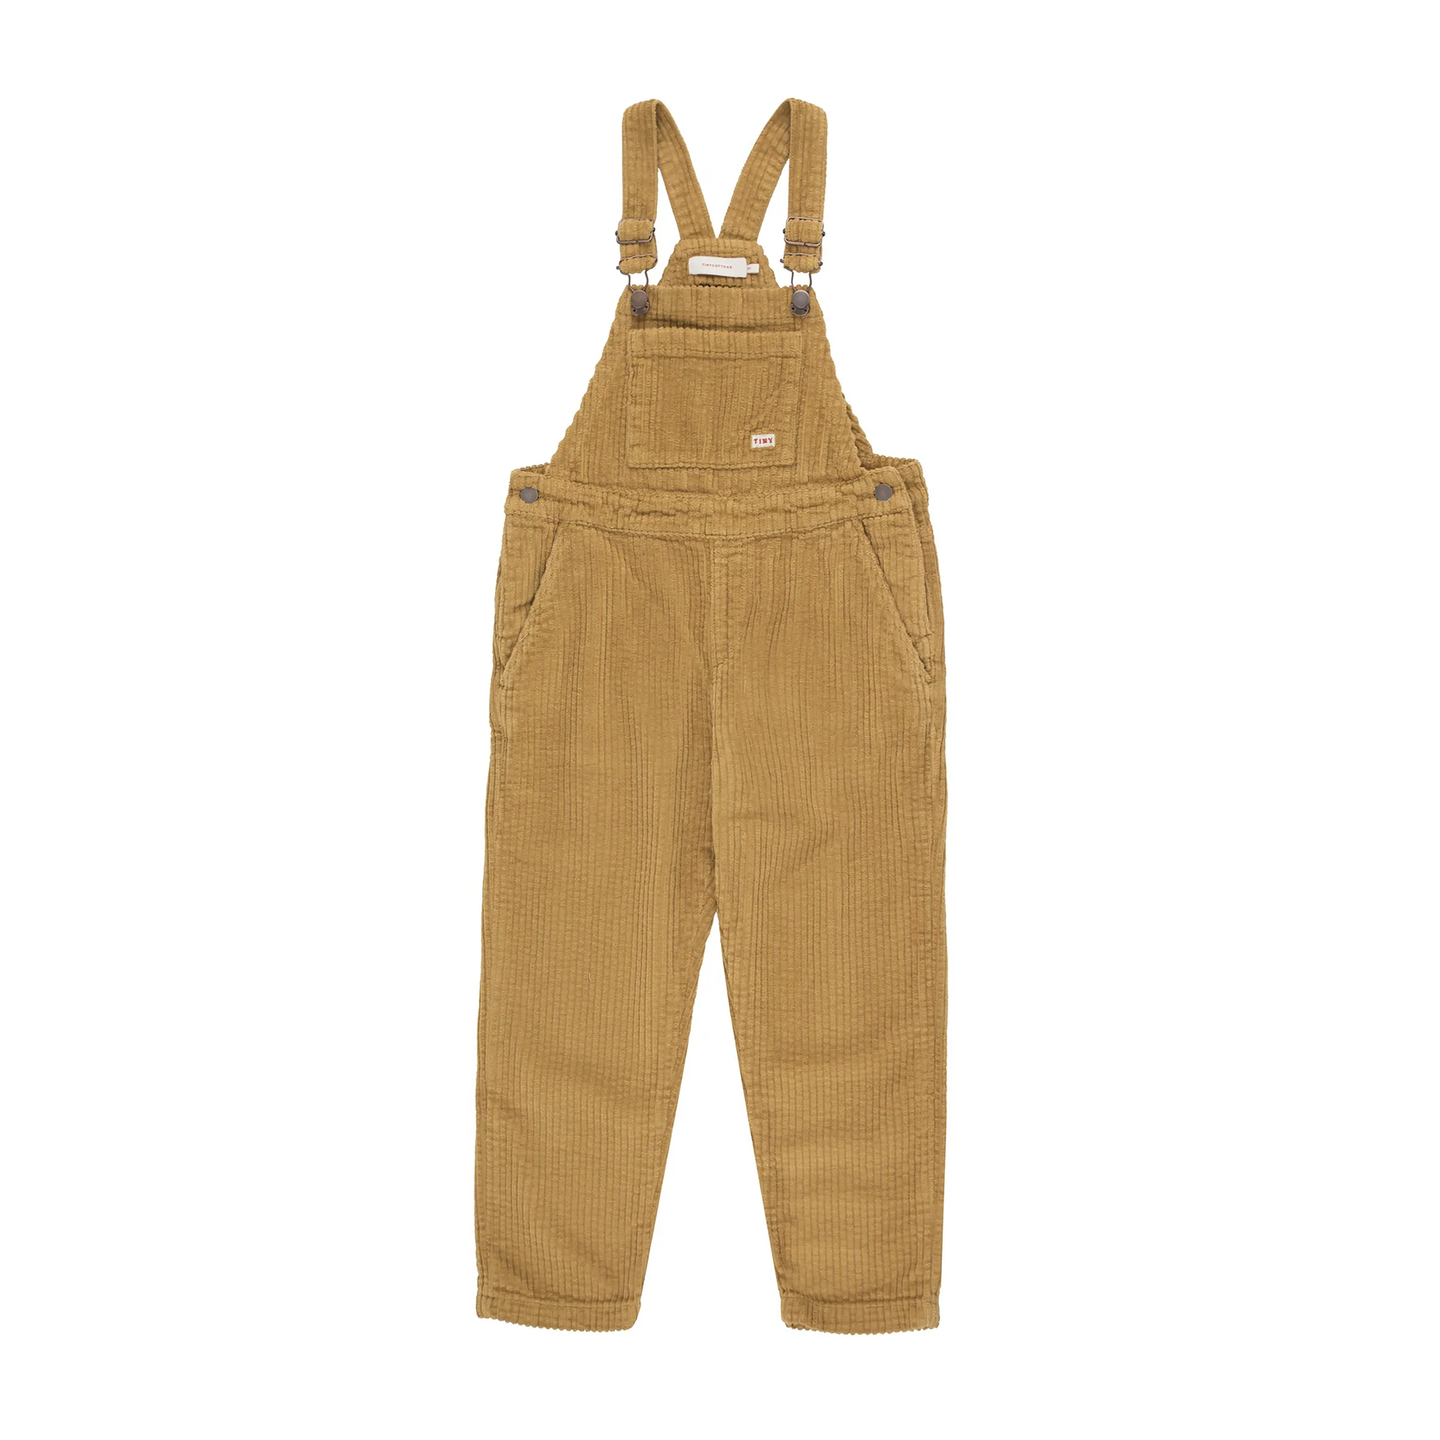 [2y] TINYCOTTONS Cord Overall in Mustard BNWT